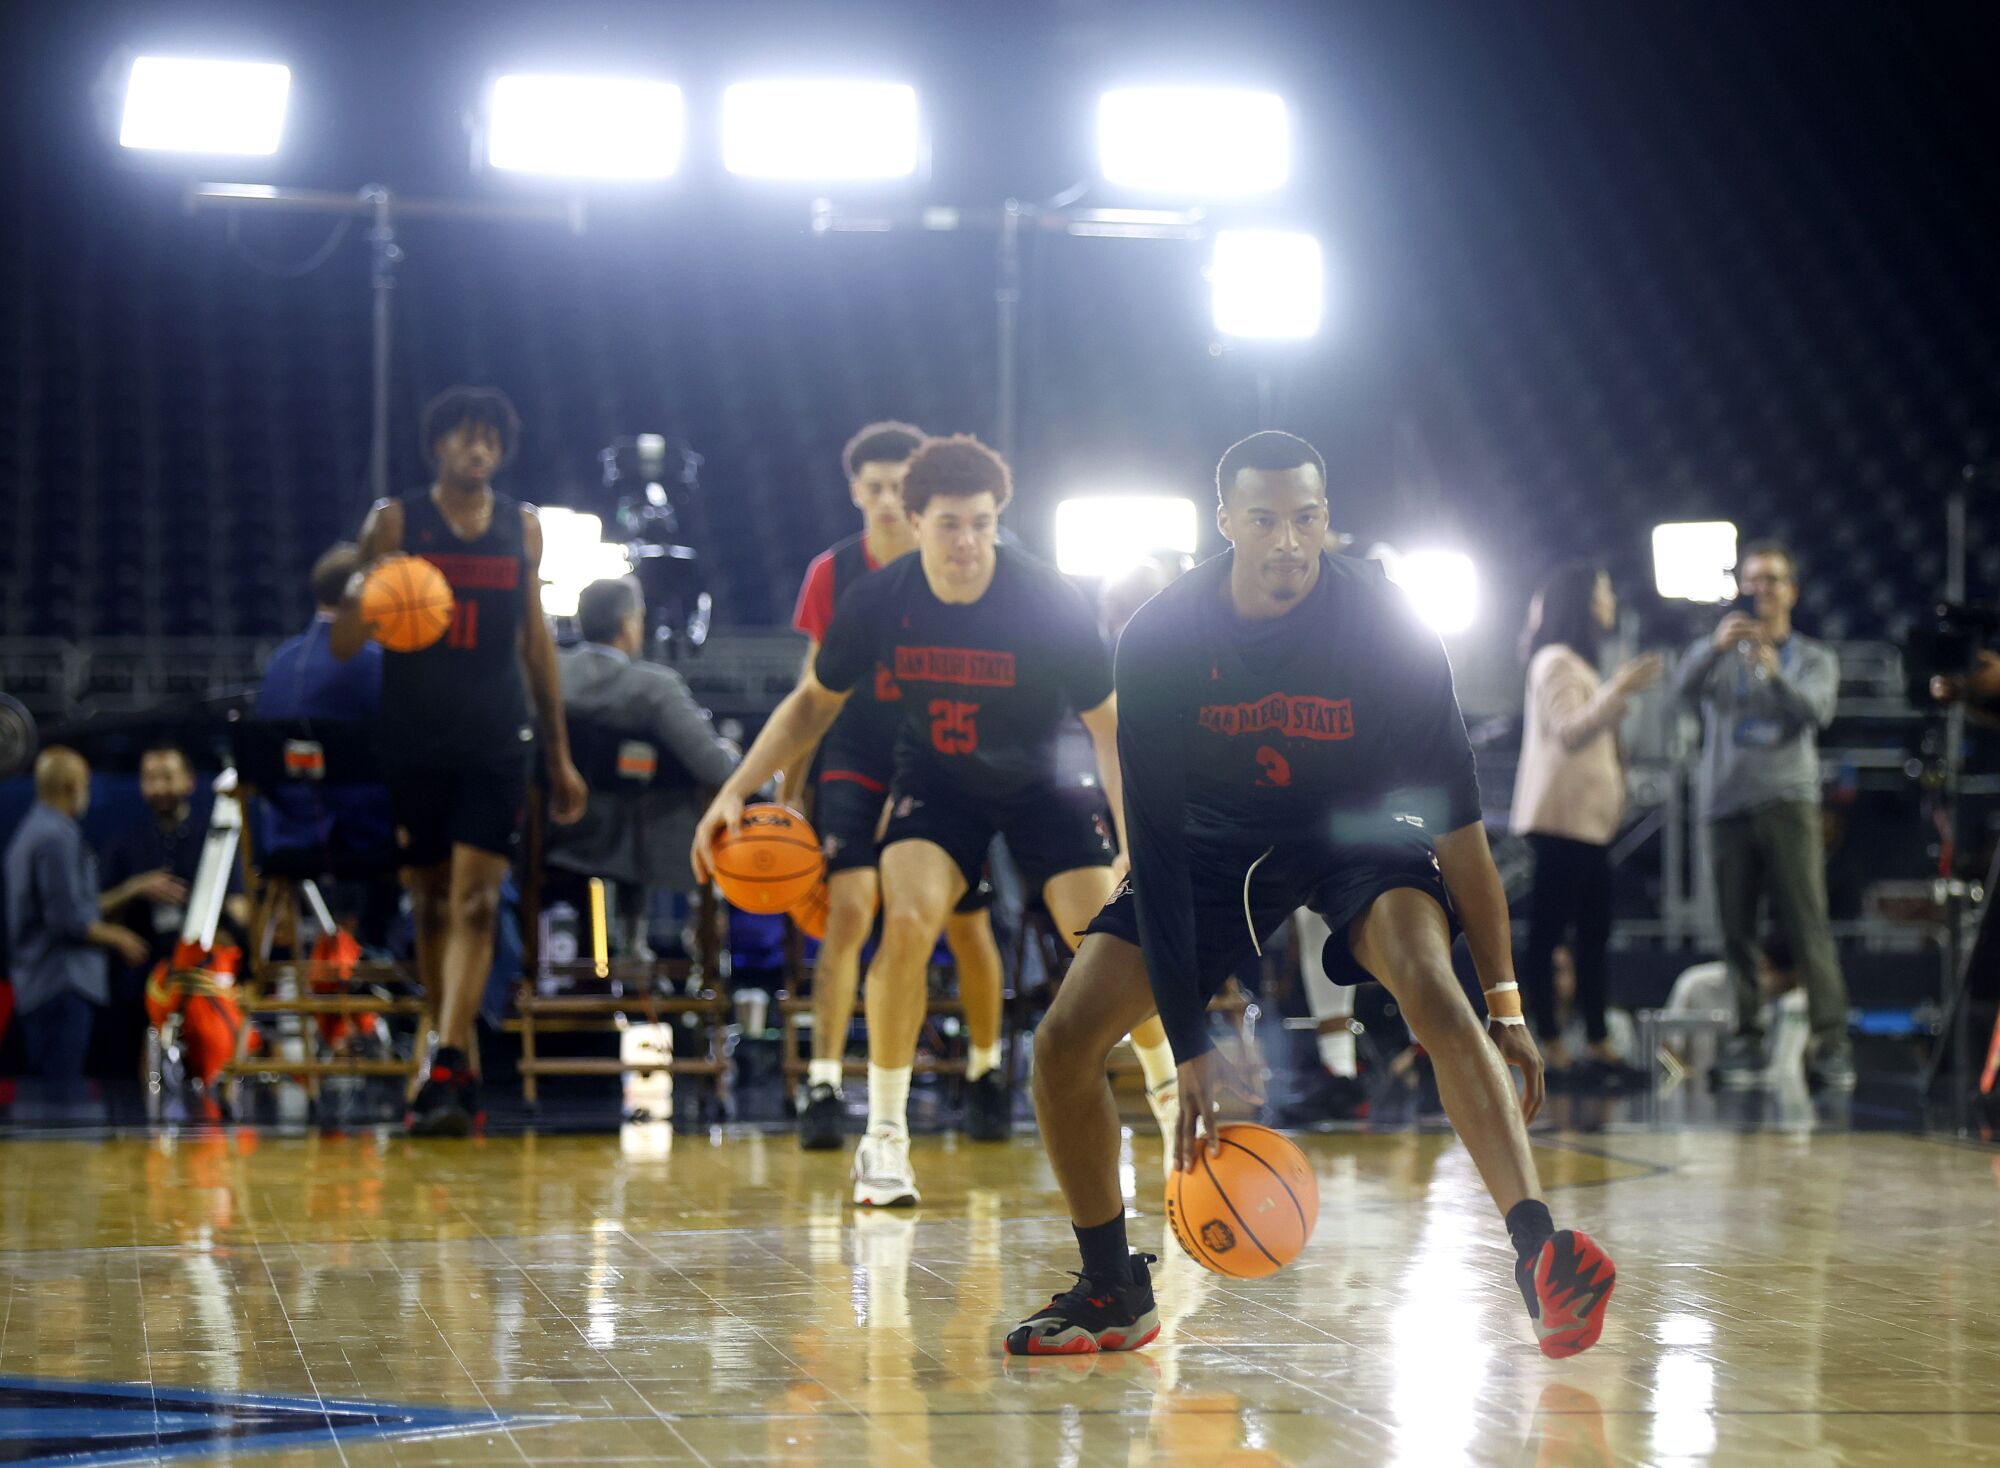 San Diego State's Micah Parrish dribbles during a practice for a Final Four game.